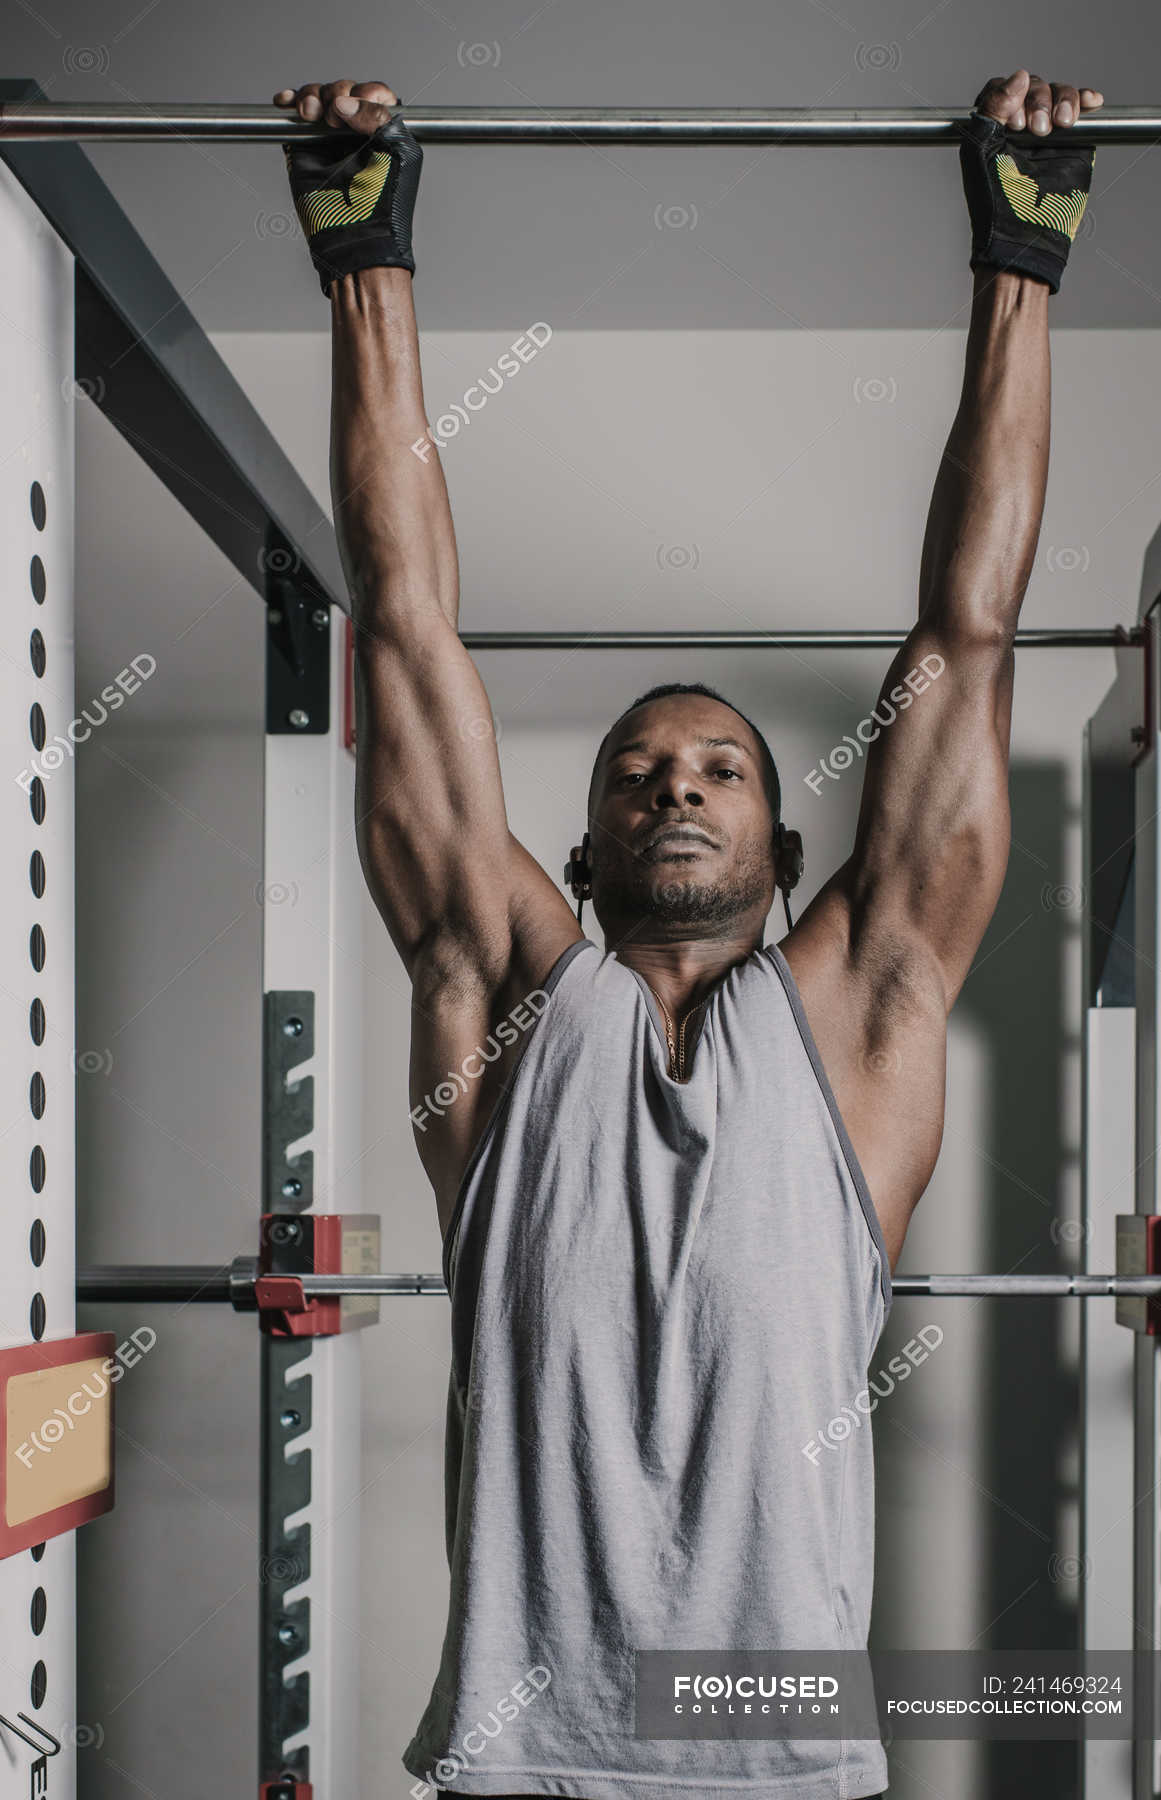 Black Muscular Guy Hanging On Bar In Gym People Looking At Camera Stock Photo